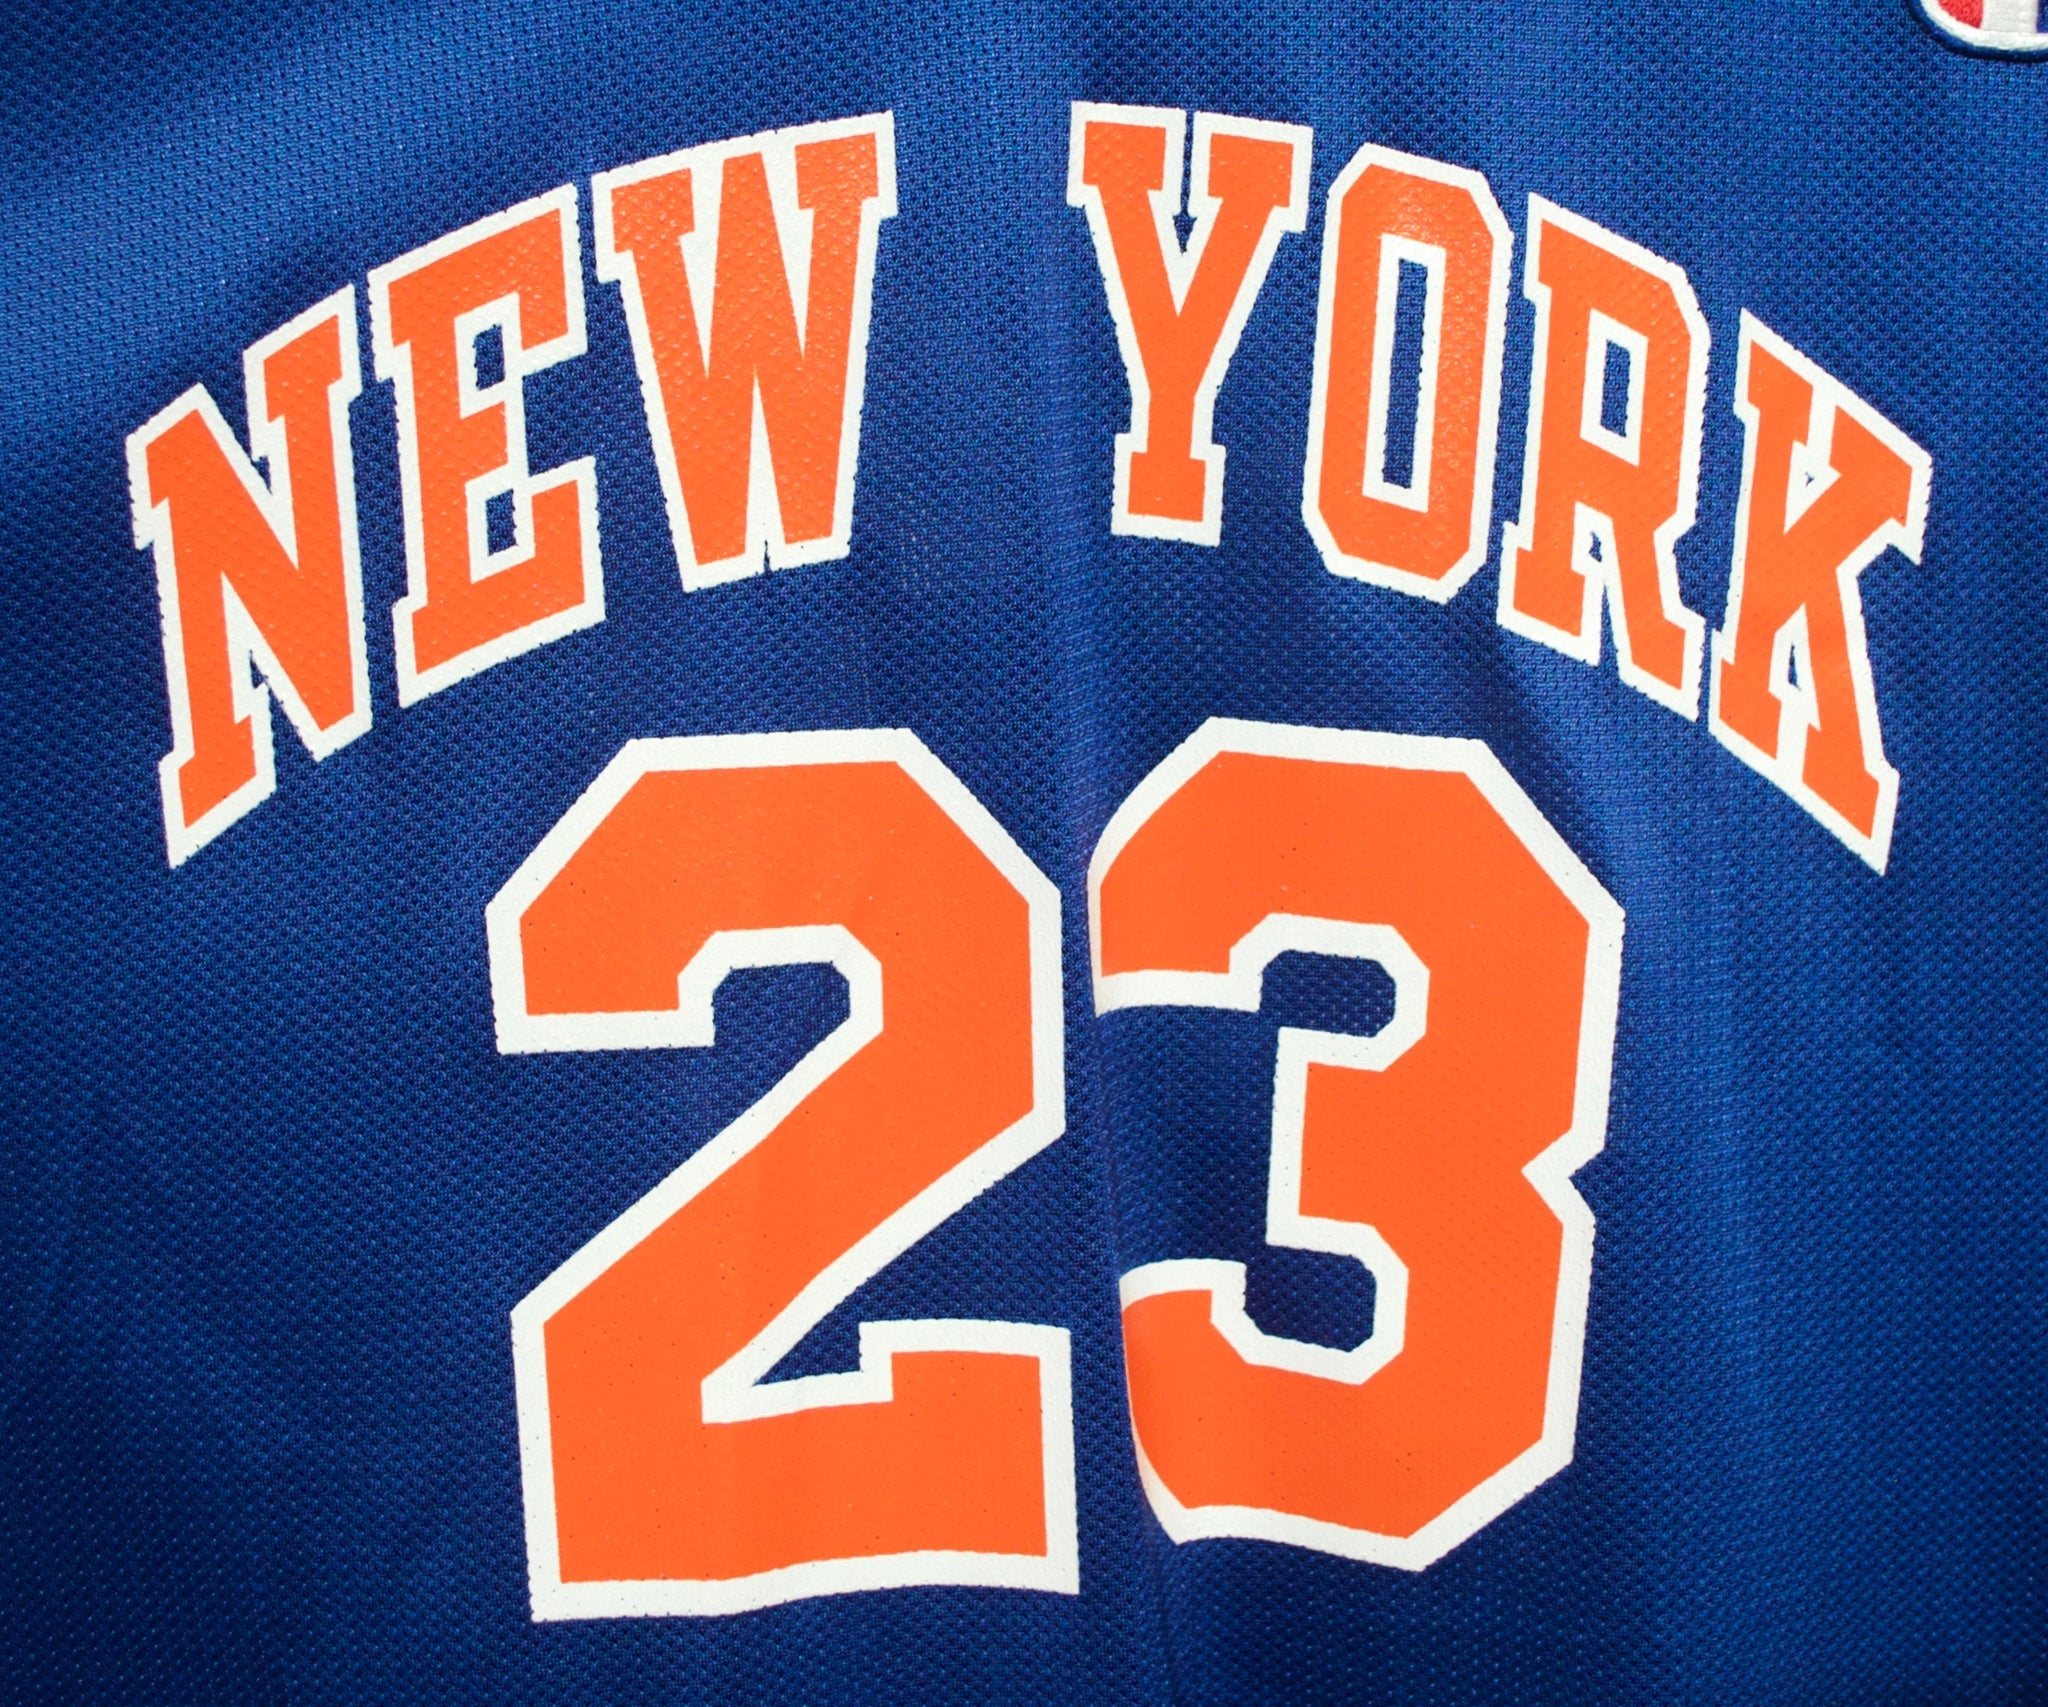 marcus camby knicks jersey